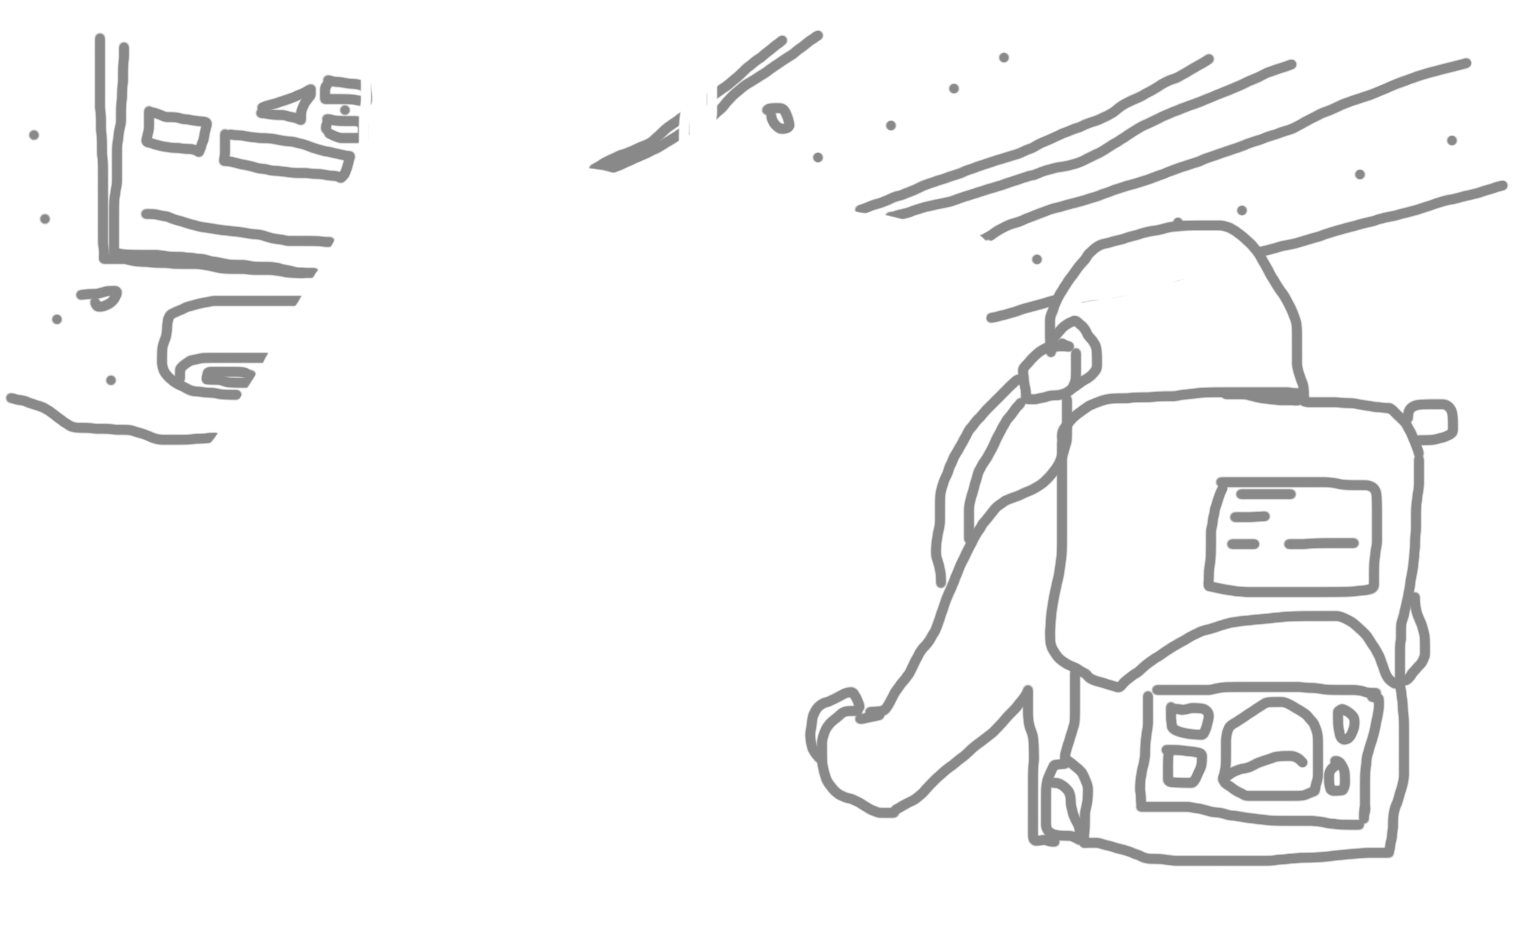 A sketch of a still from the film Dark Star (1974) depicting a large rectangular supercomputer jutting out from underneath the titual spaceship. It is talking to a suited-up astronaut in the foreground. On the bottom of the computer is a label that reads 'CAUTION - NEURAL NET'.